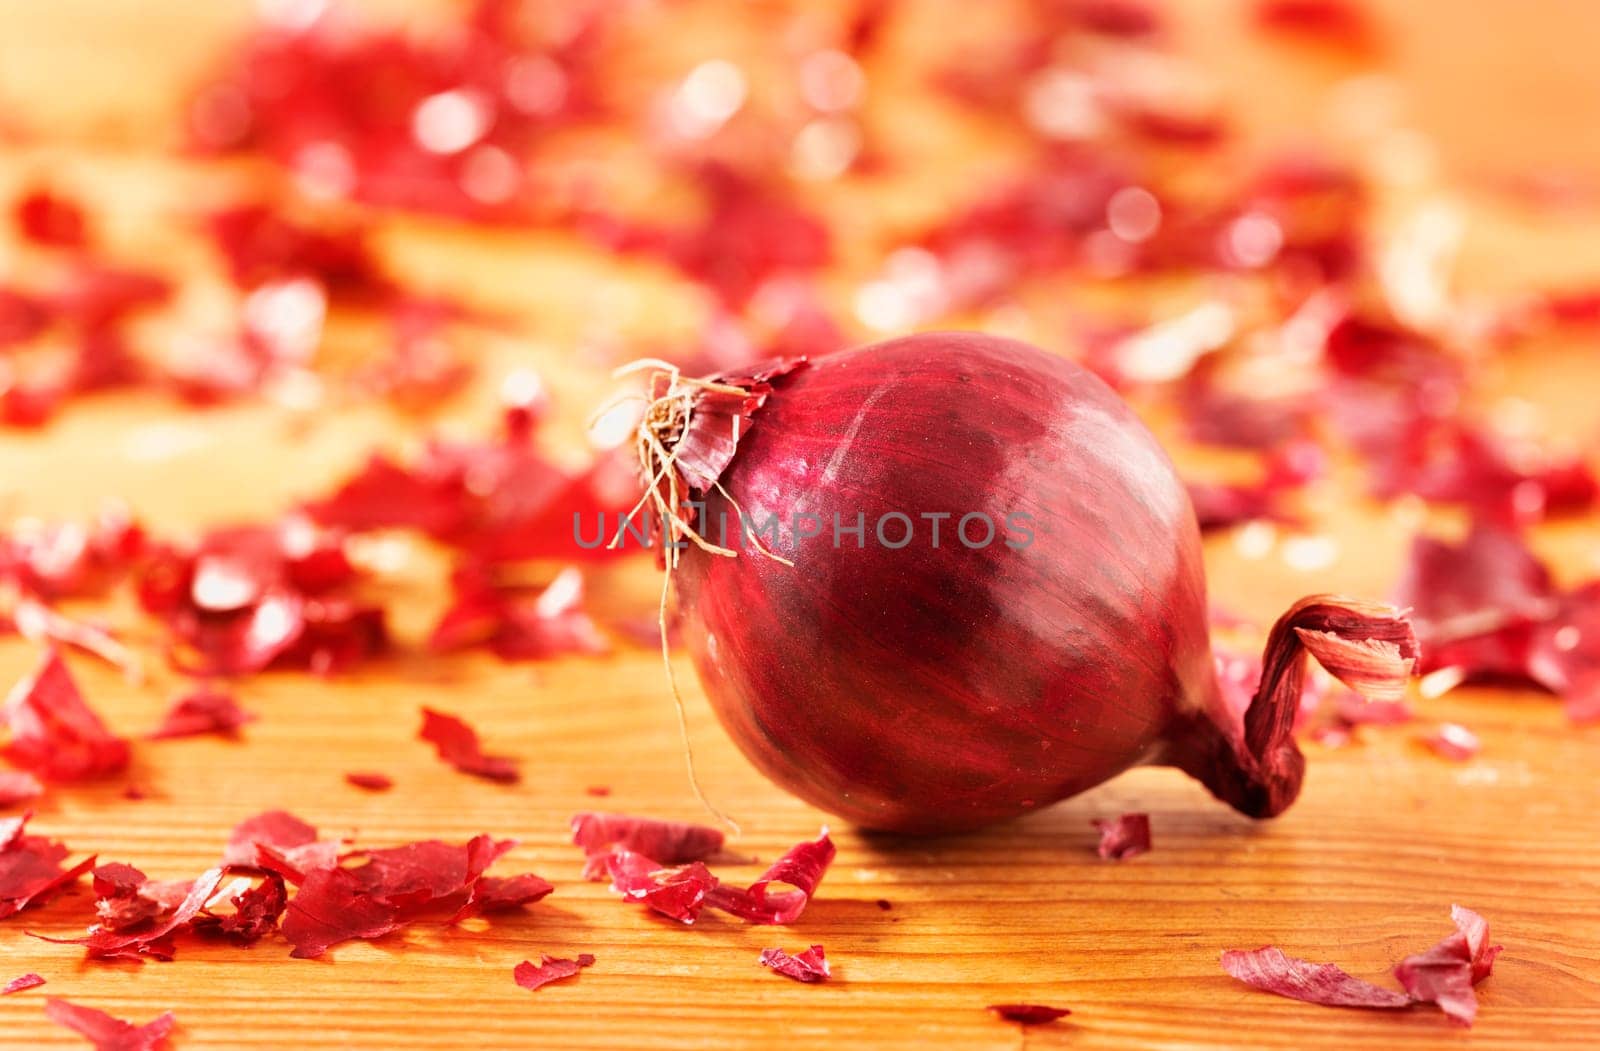 Red onion on table by victimewalker